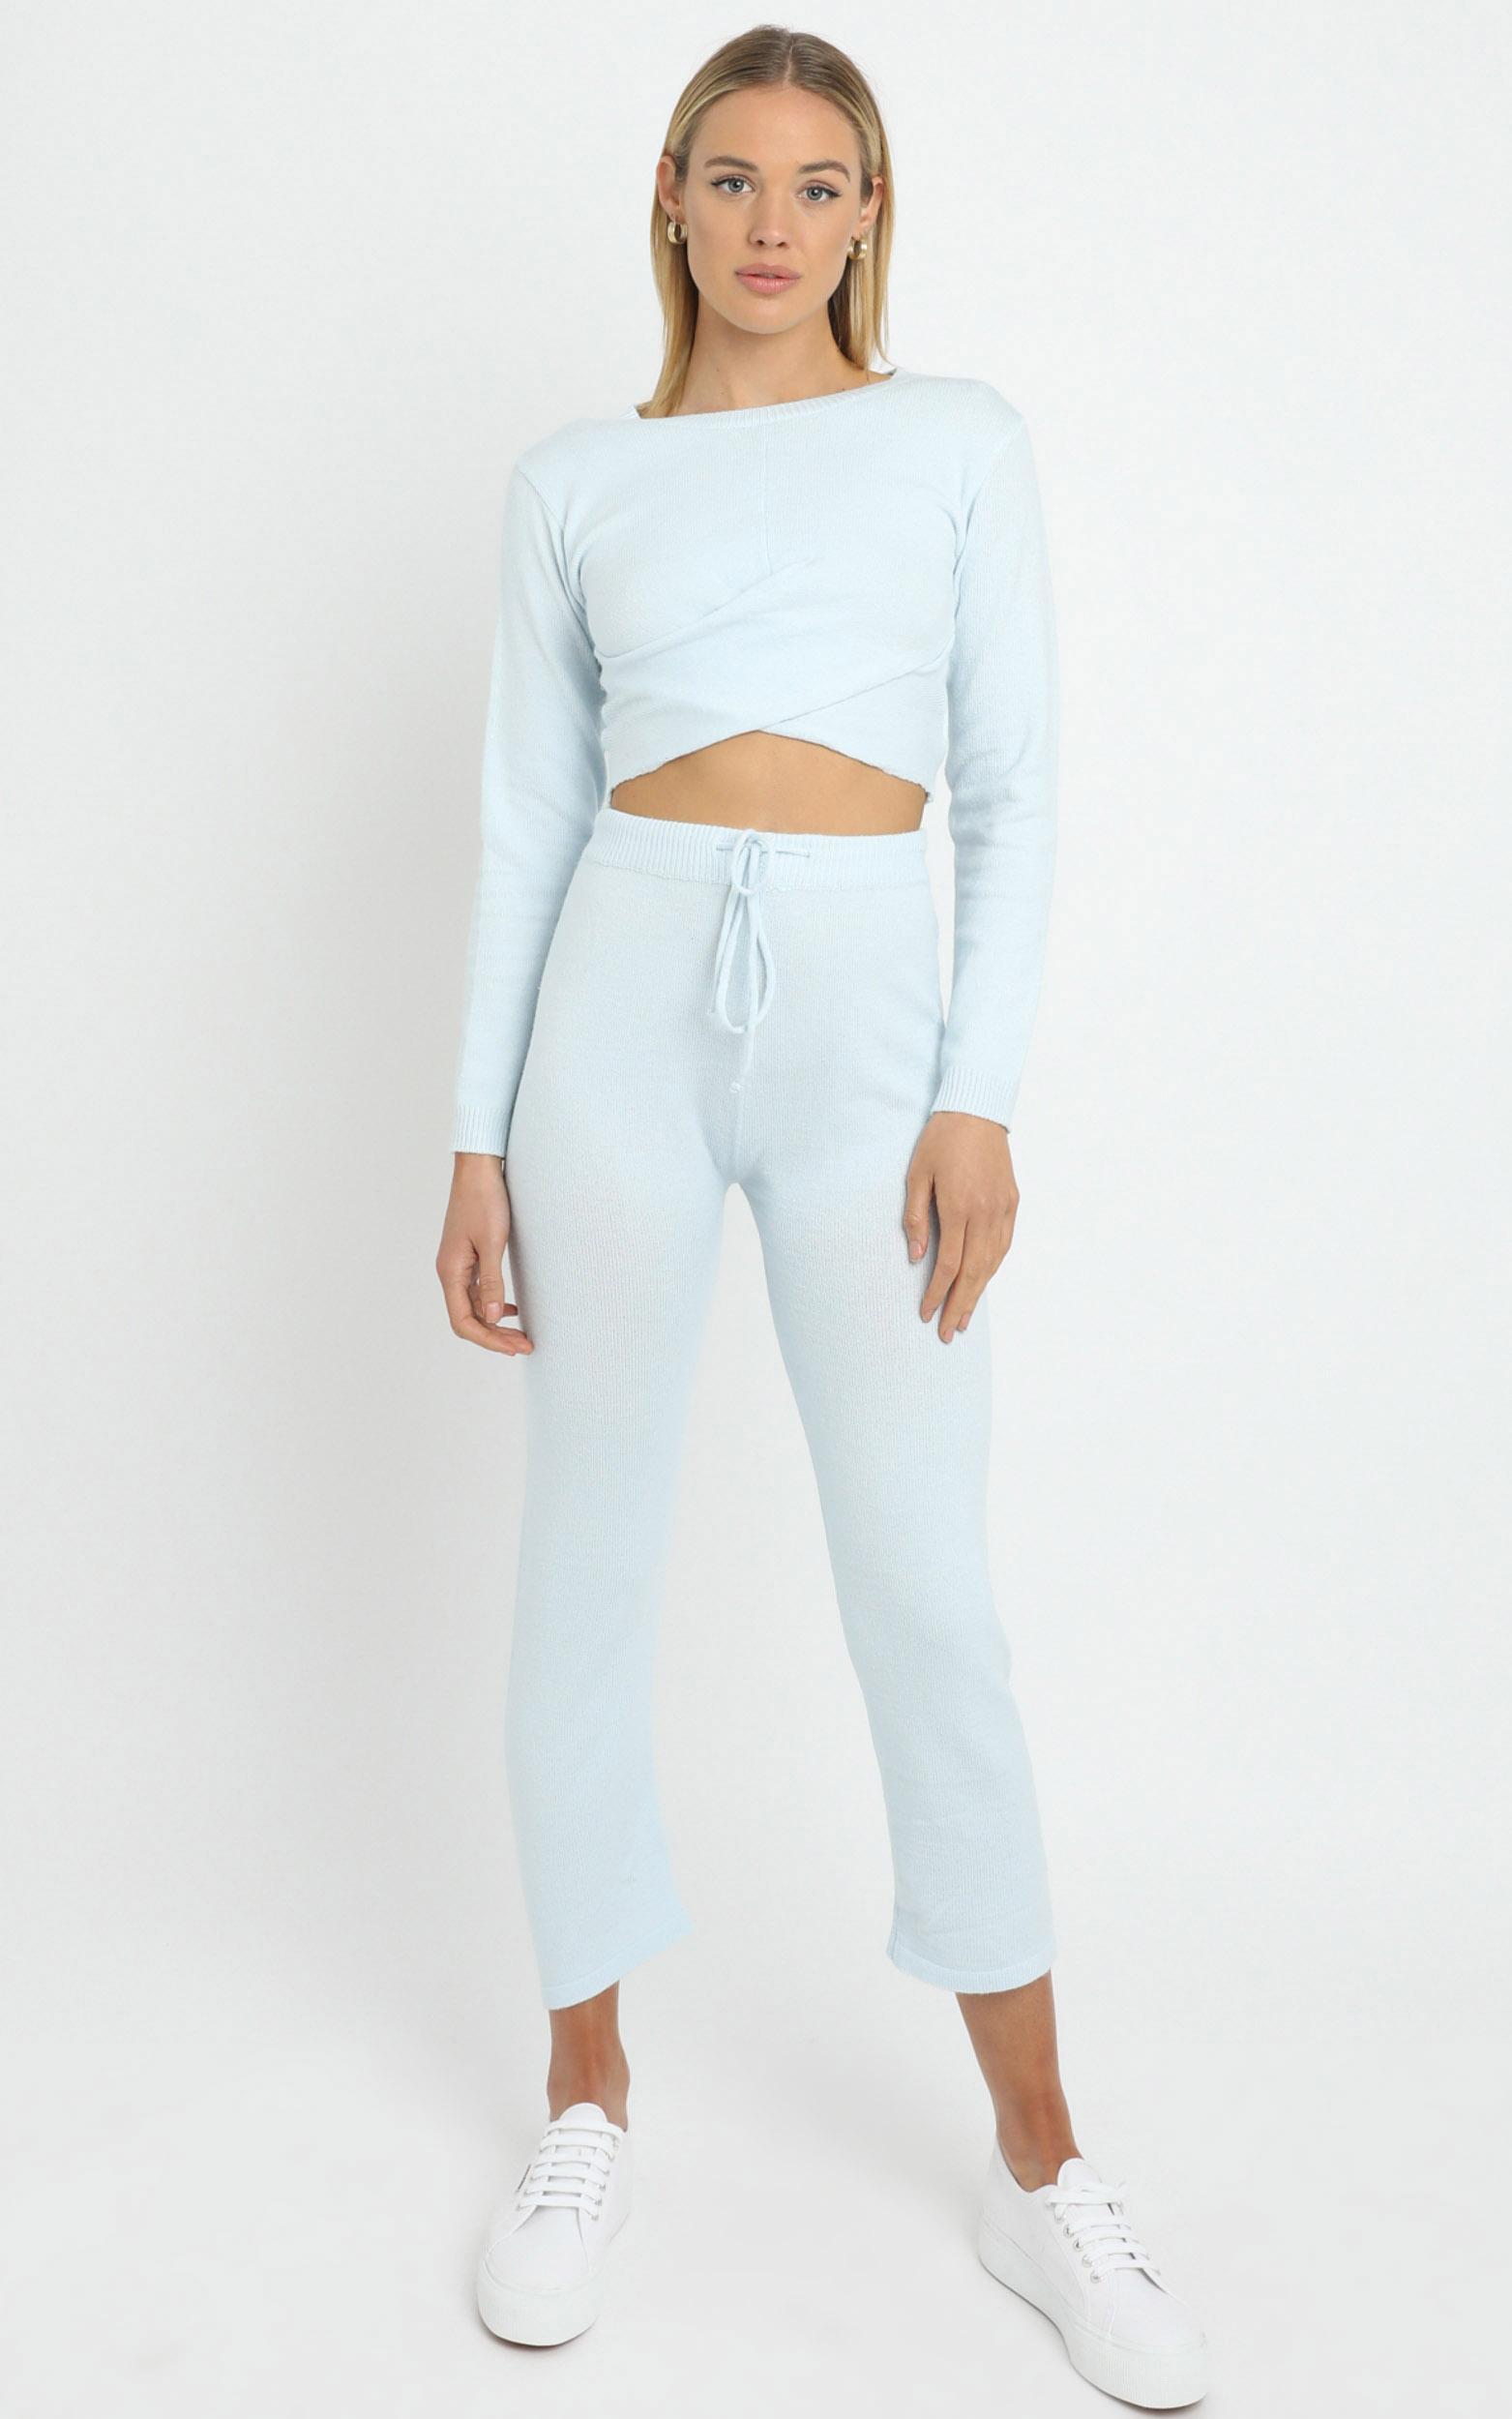 Deanna Knit Pants in Baby Blue - L, BLU2, hi-res image number null